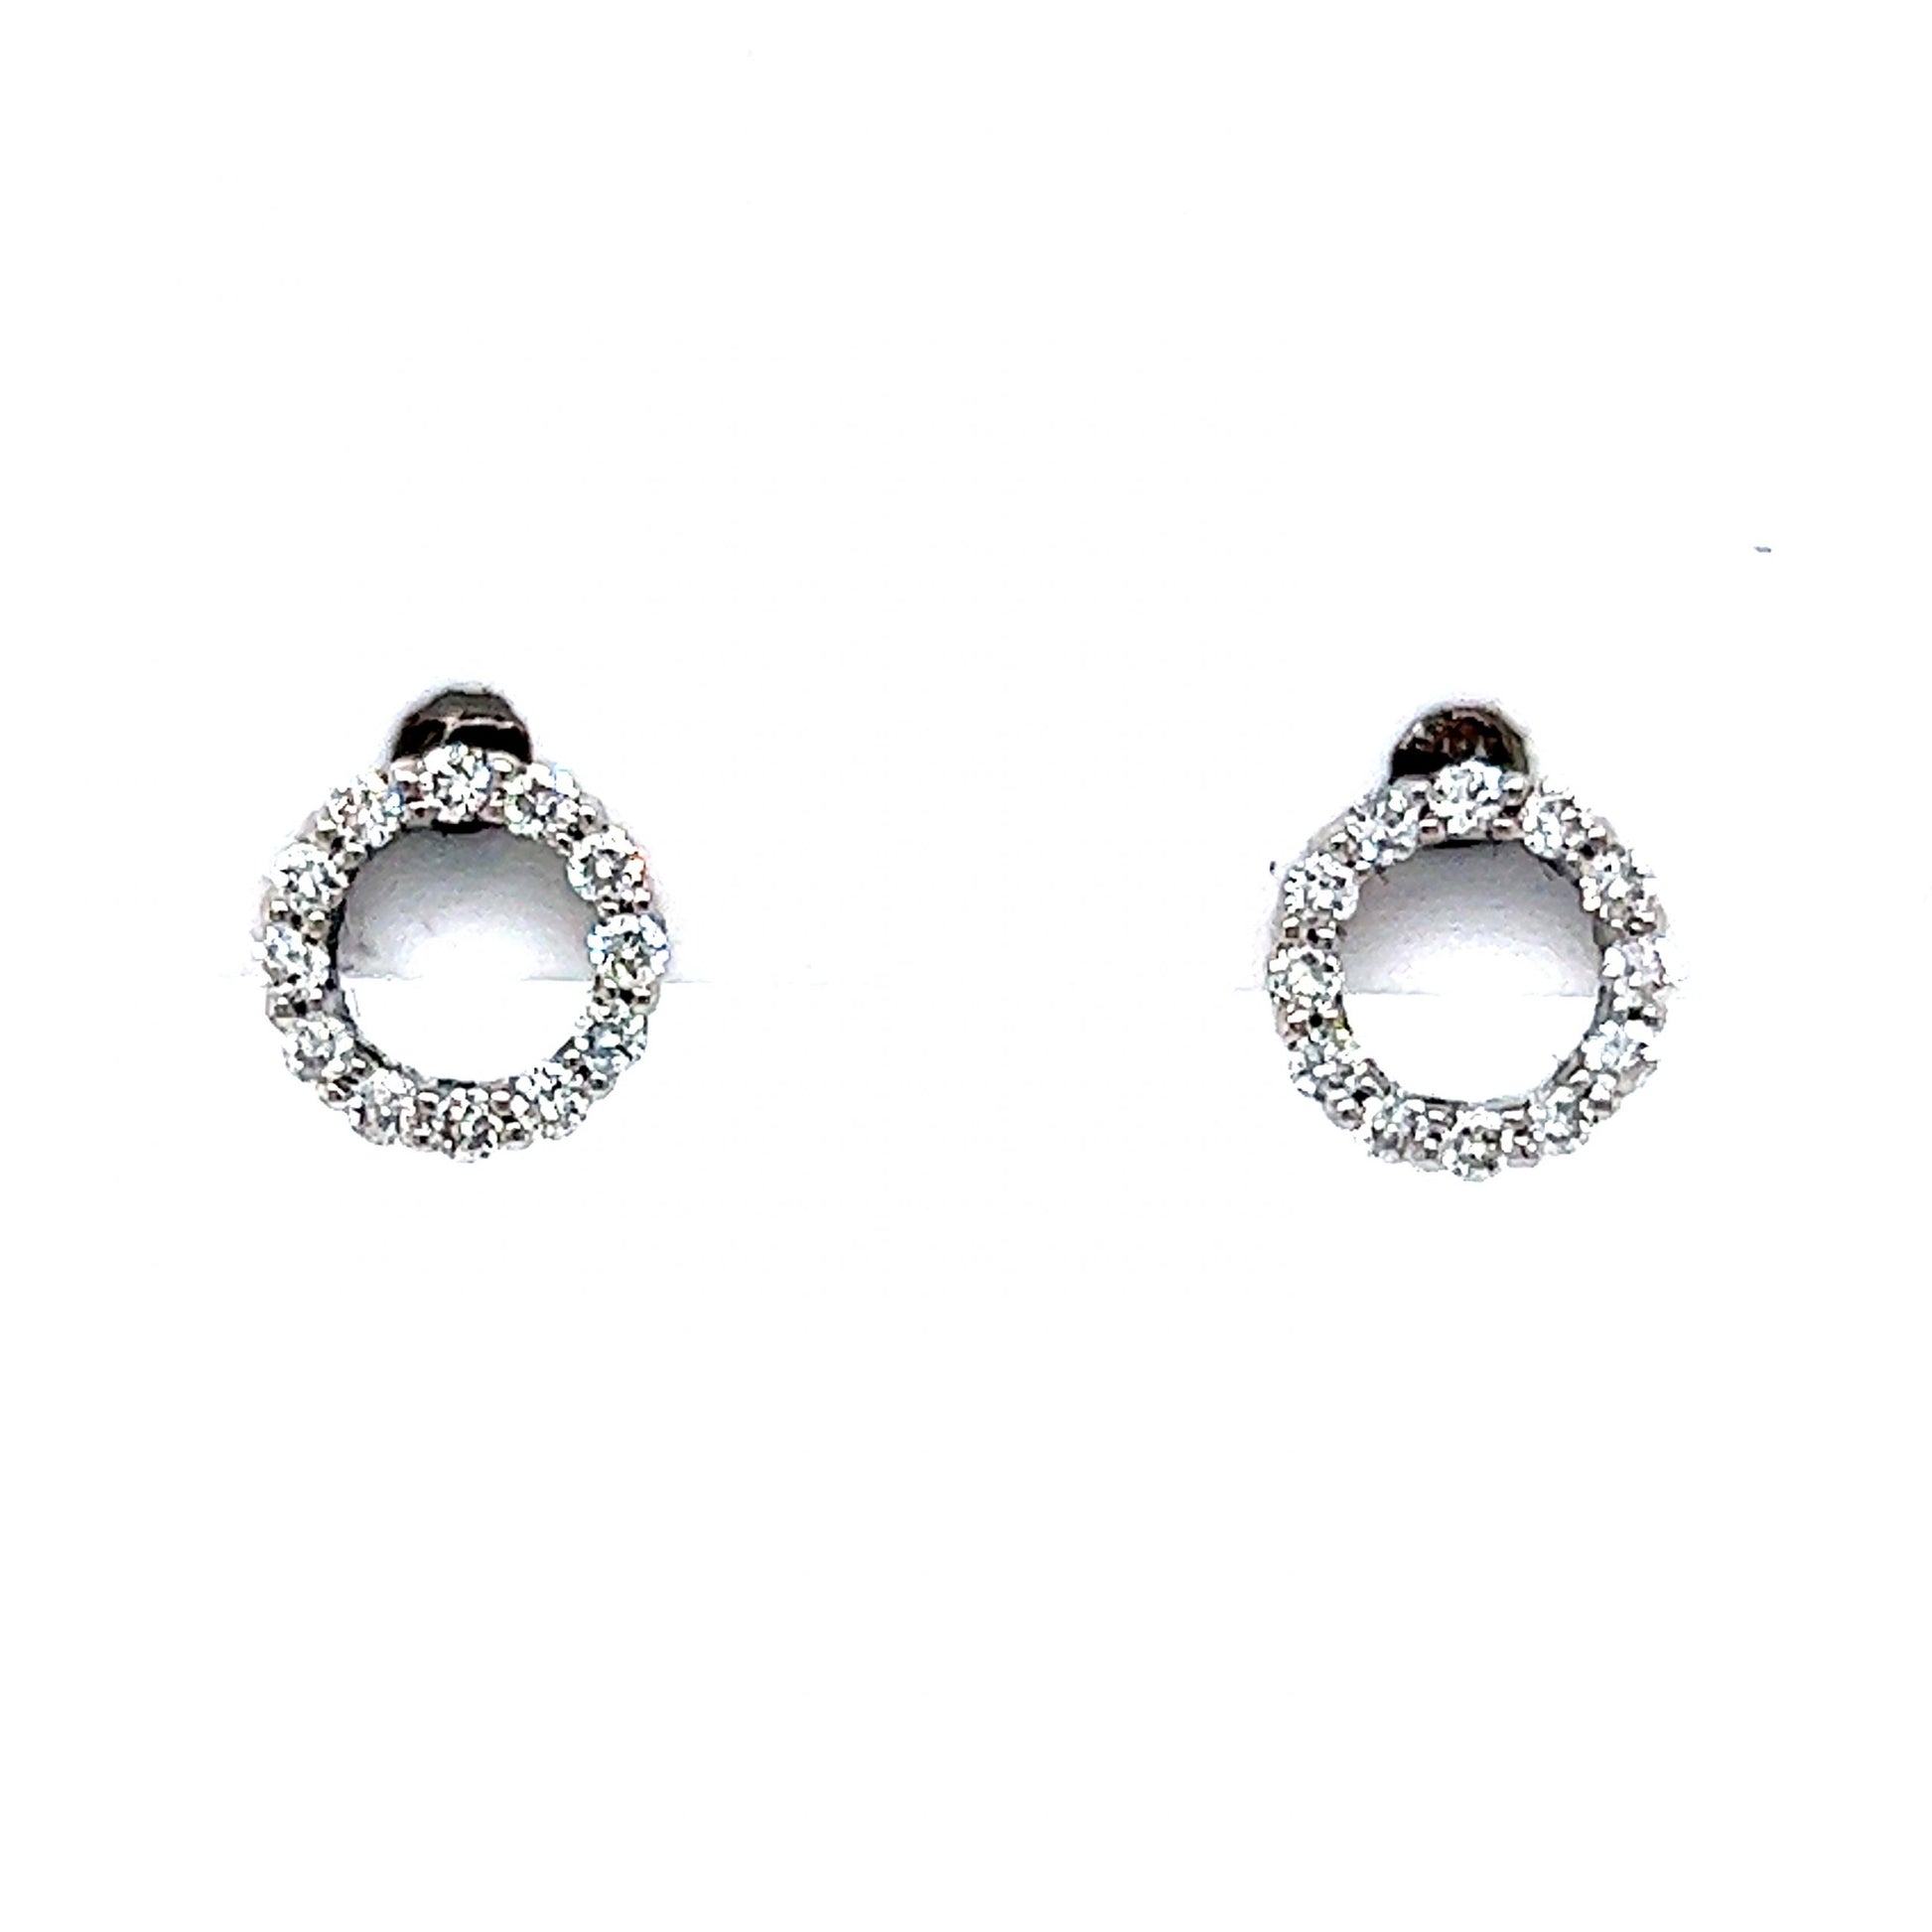 Pave Diamond Circle Stud Earrings in 14k White Gold